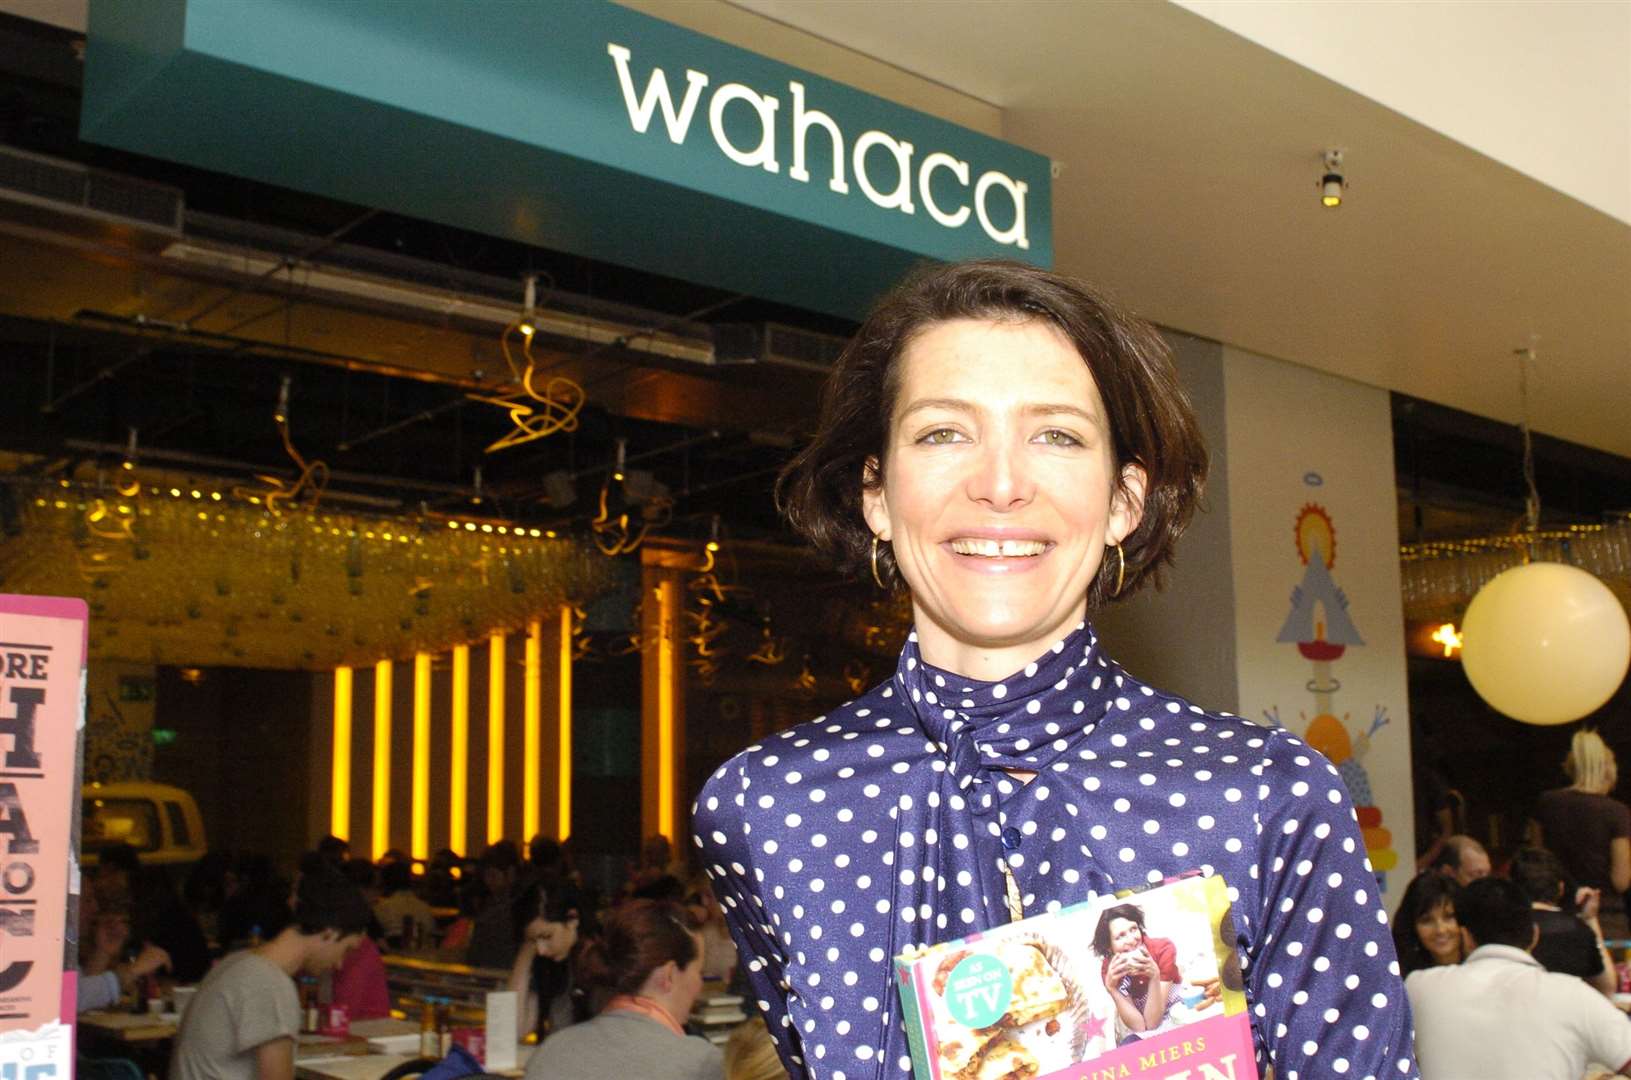 Masterchef winner Thomasina Miers at Wahaca in Bluewater in 2012